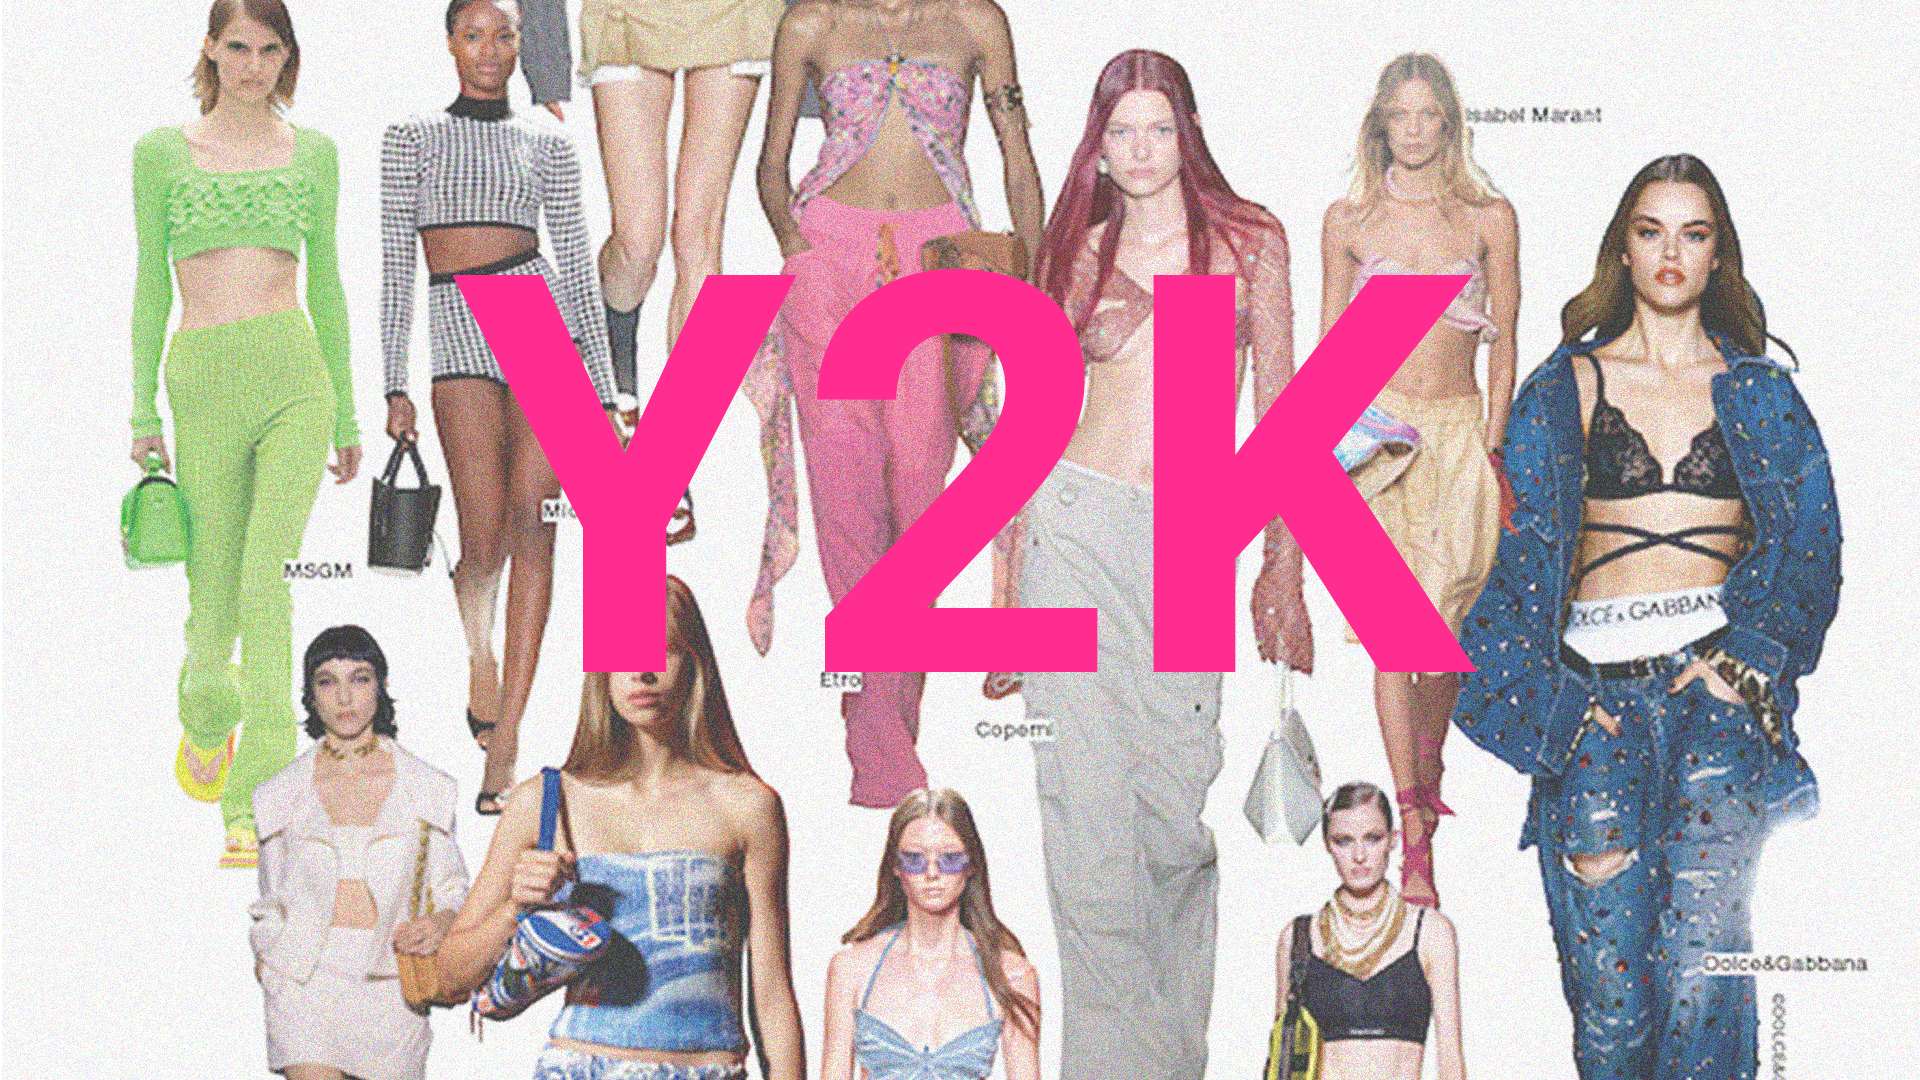 Y2K fashion has taken over in US. And Gen Z is loving it - The Mainichi